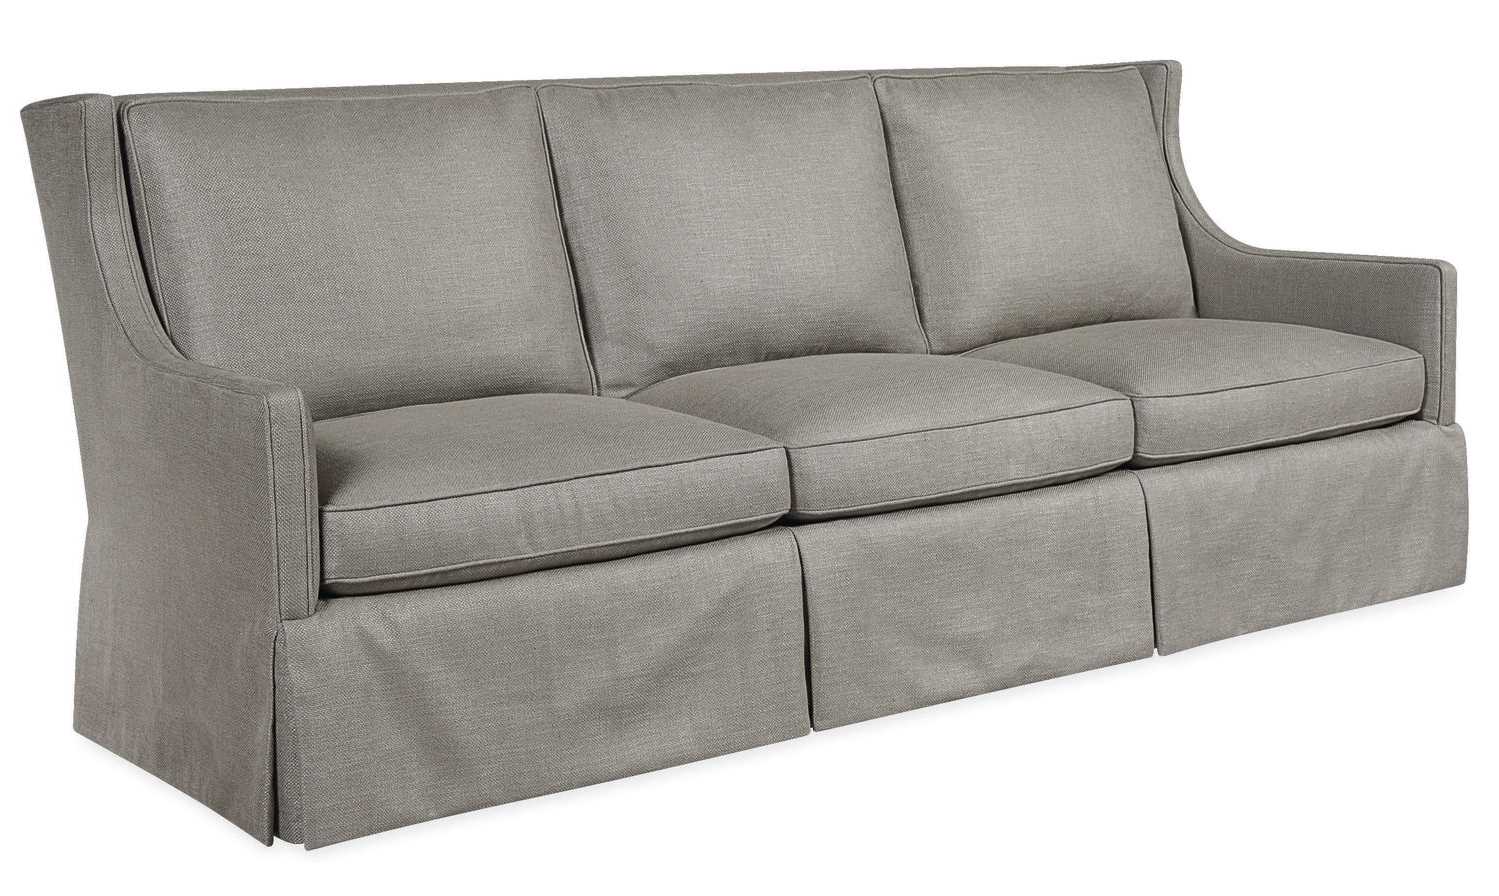 What Is Seat Depth On A Sofa